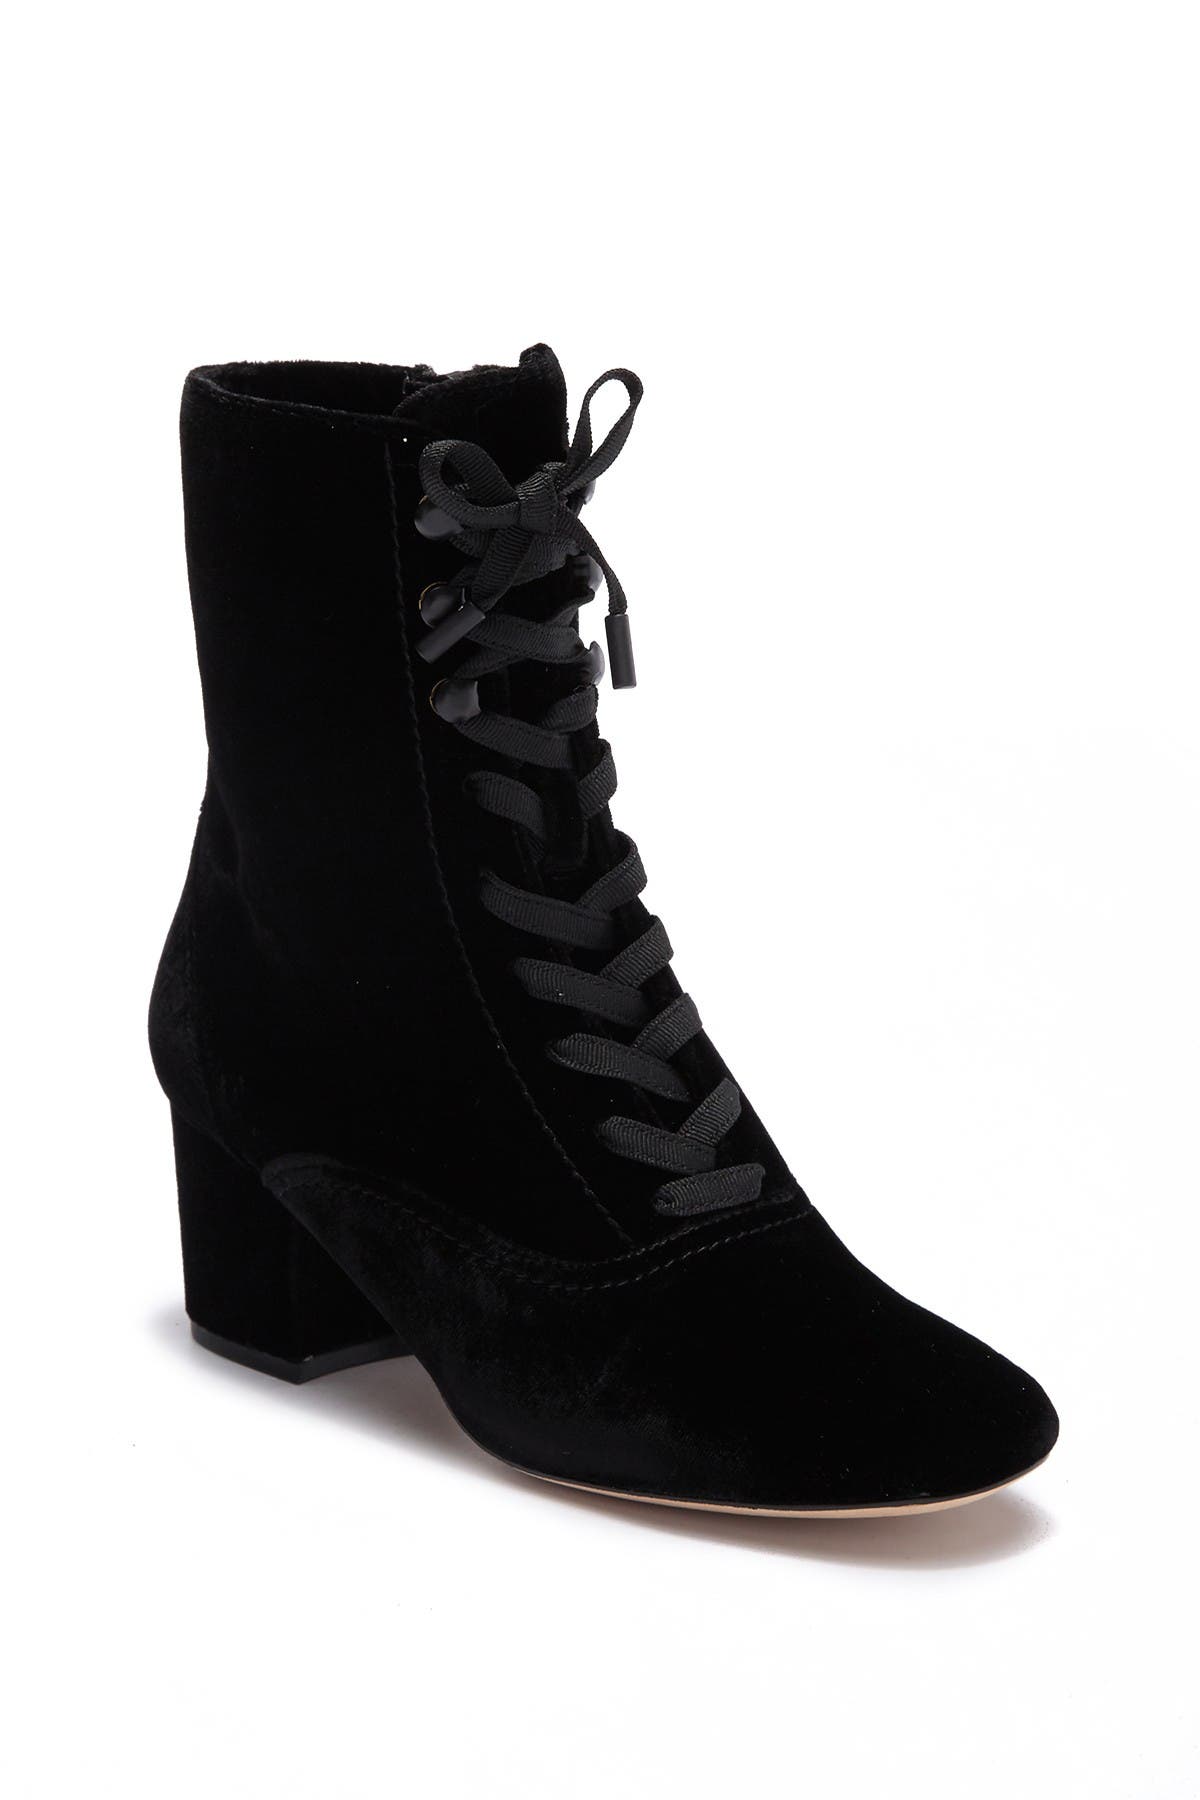 joie lace up boots